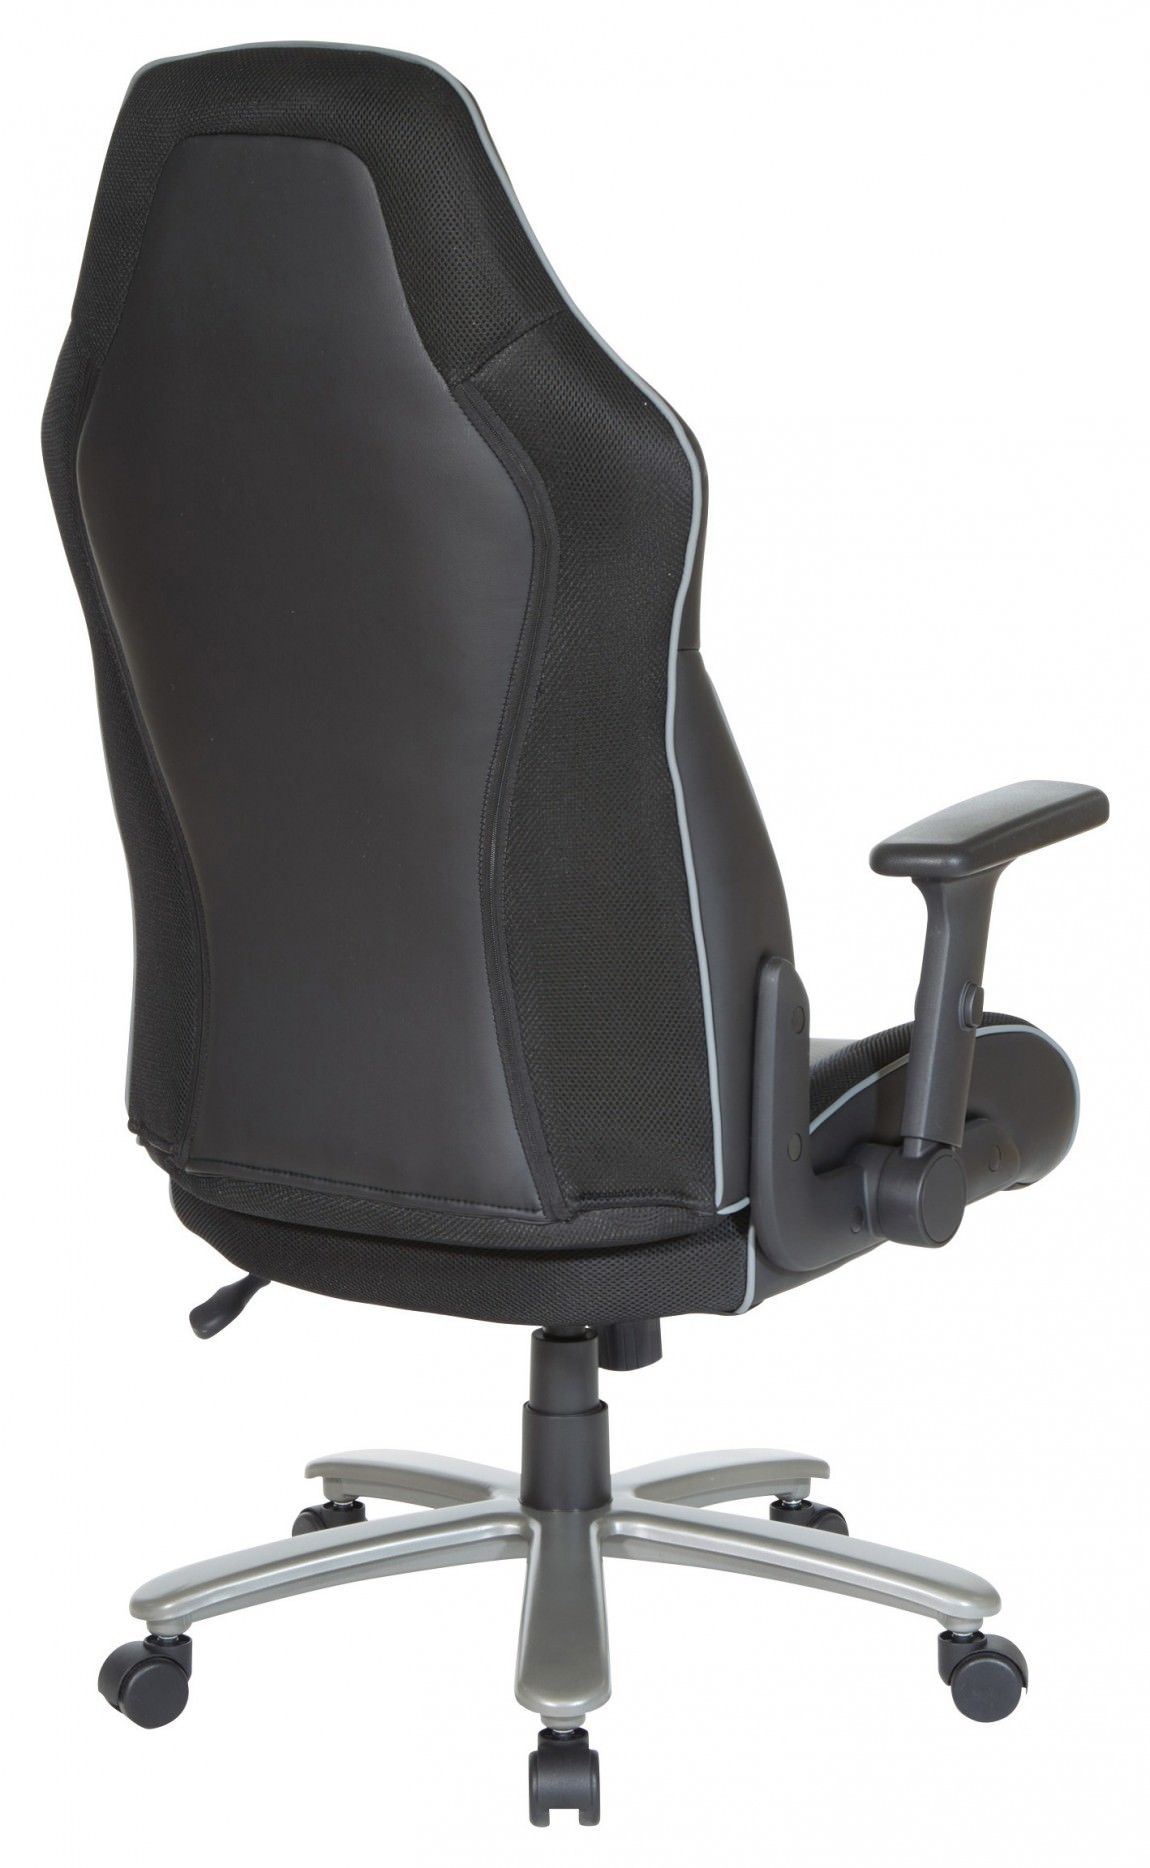 Big and Tall Gaming Chair